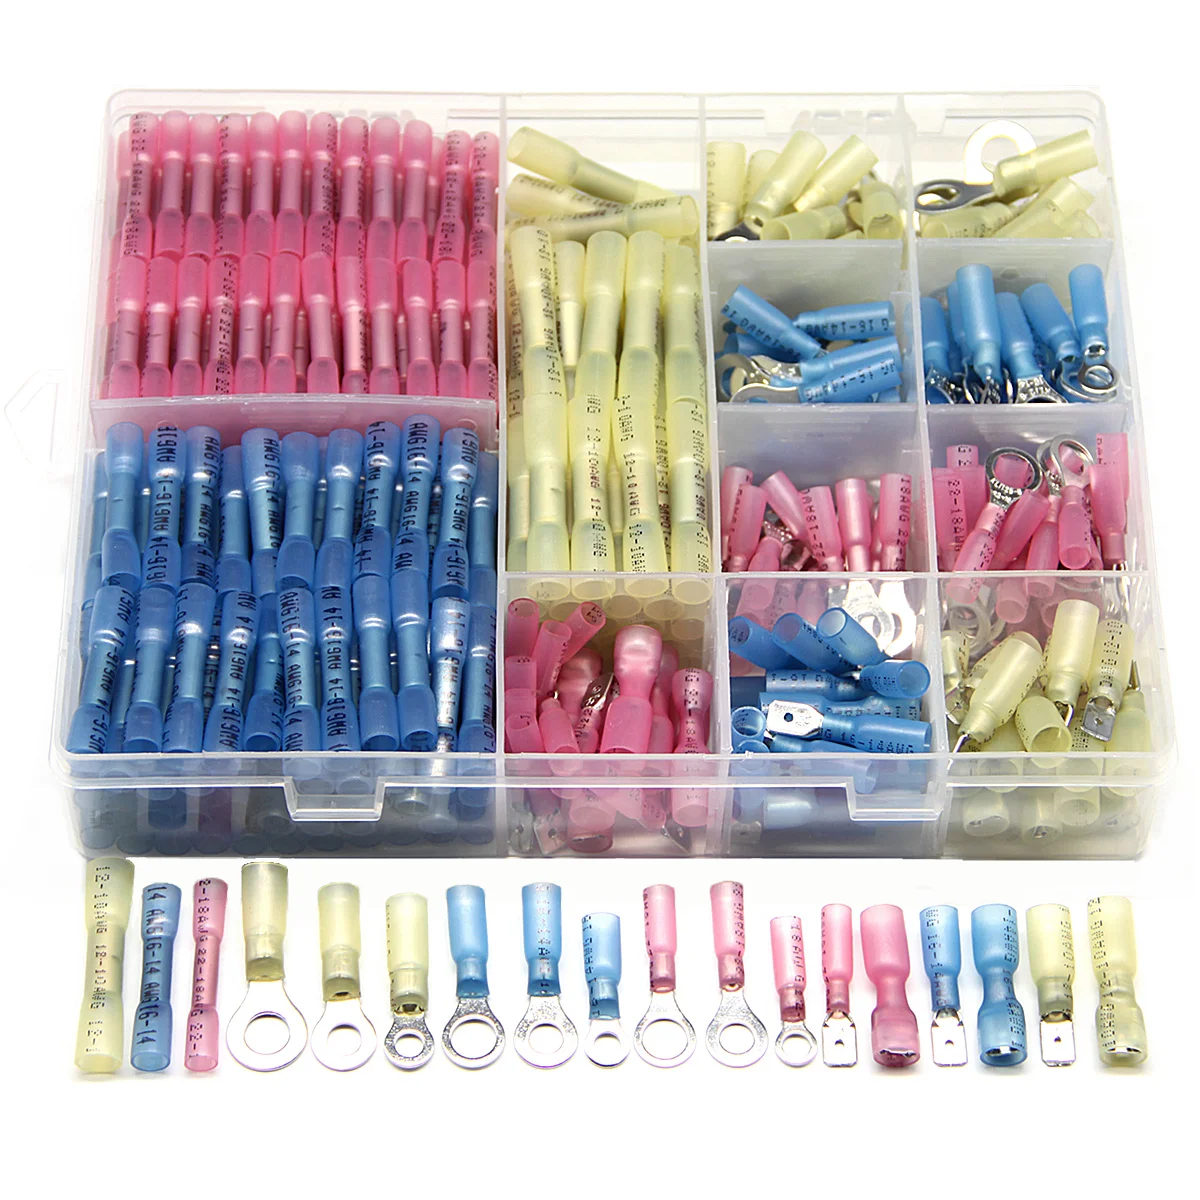 

510PCS Assortment Ring Butt Spade Heat Shrink Wire Connectors Waterproof Marine Automotive Electrical Insulated Crimp Terminals